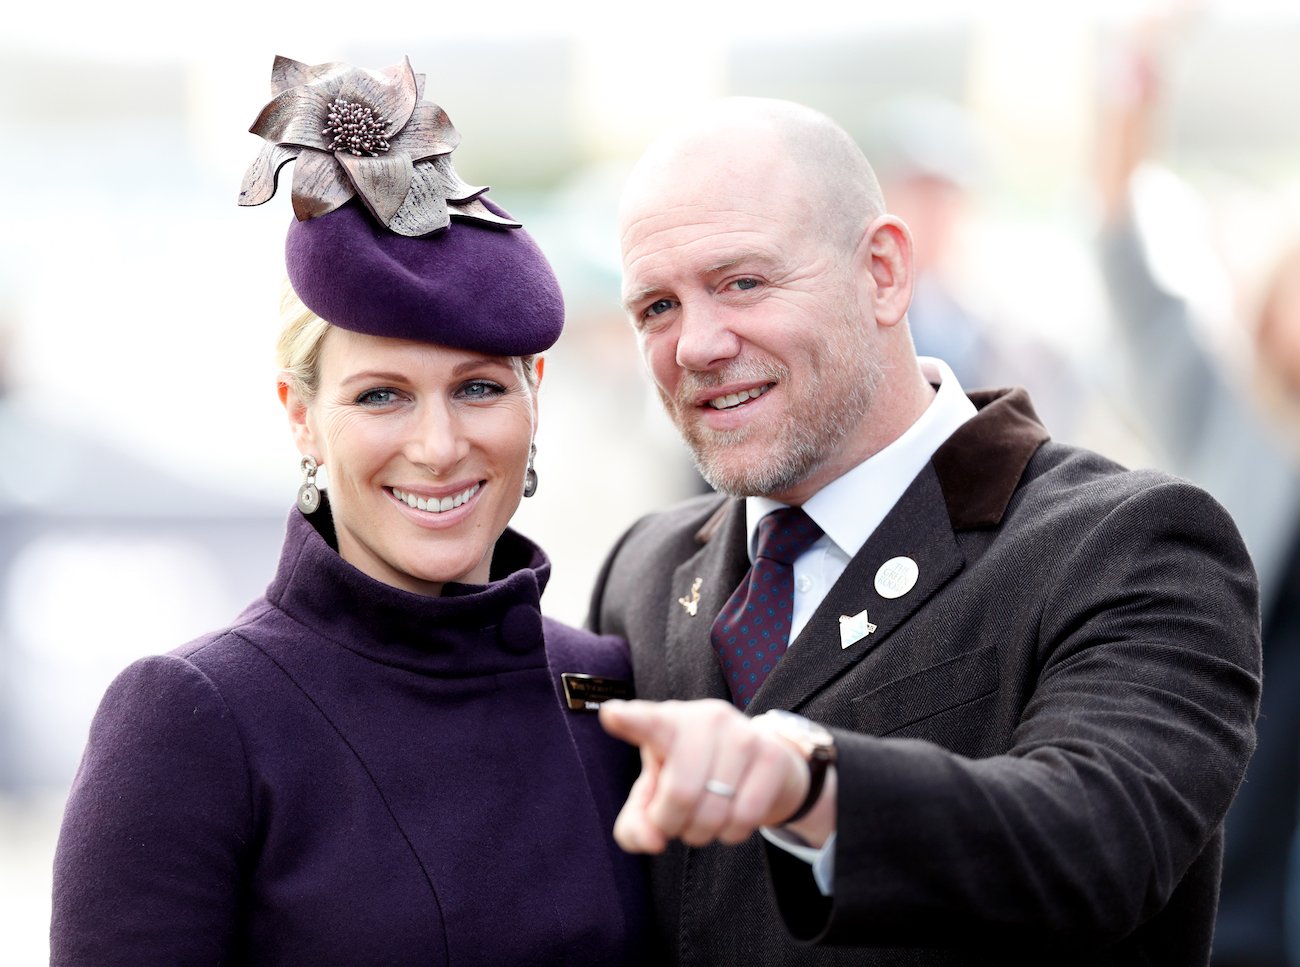 Zara Tindall smiling, Mike Tindall smiling and pointing